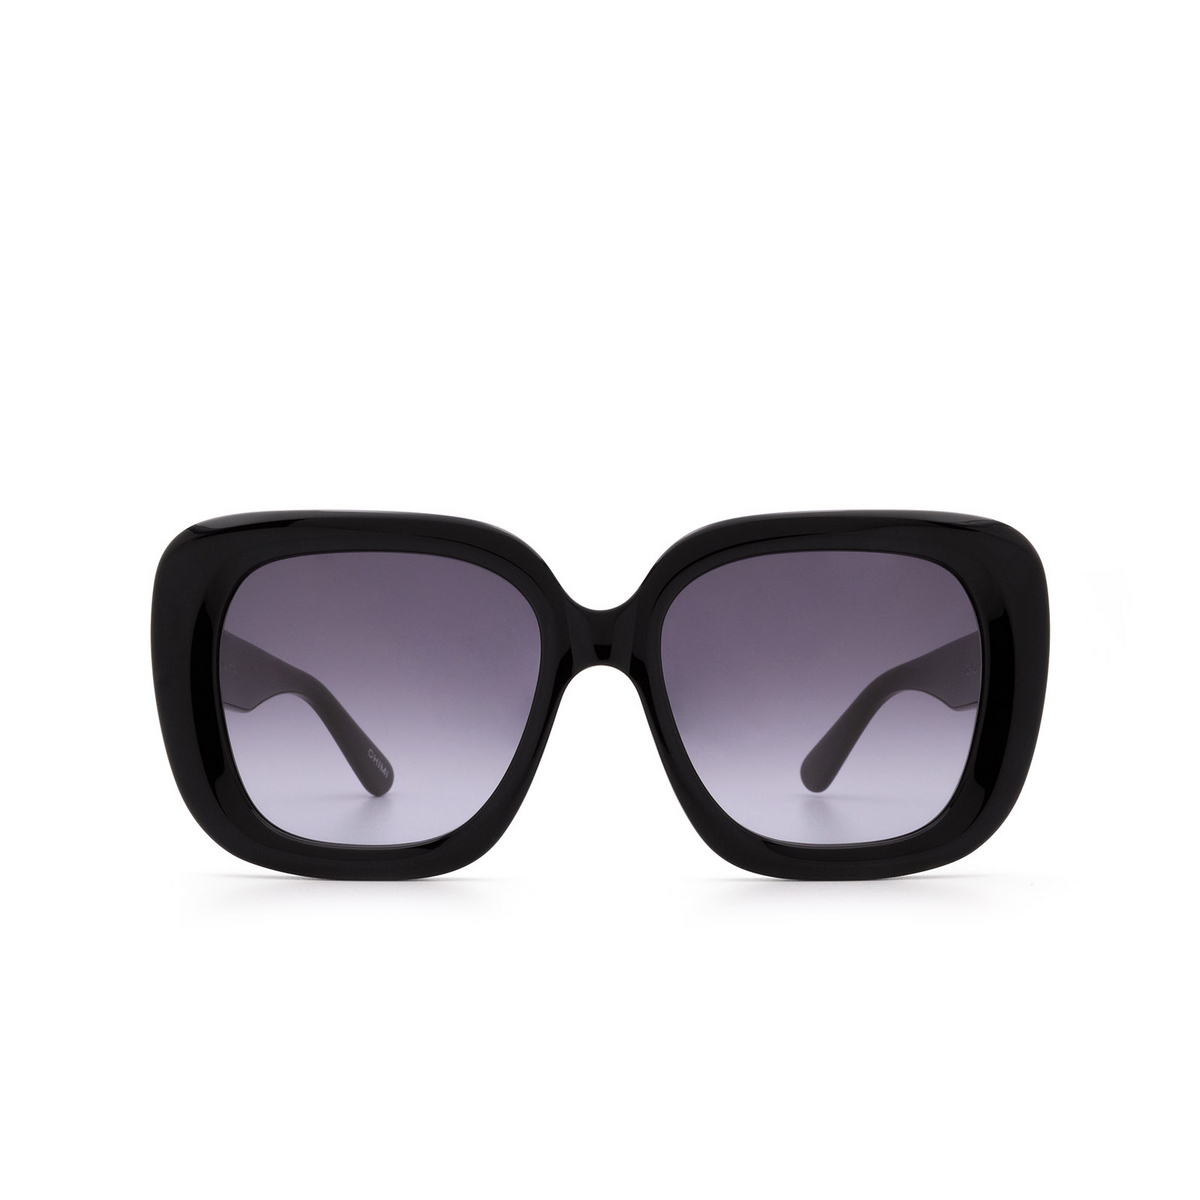 Chimi #108 Sunglasses Black - front view